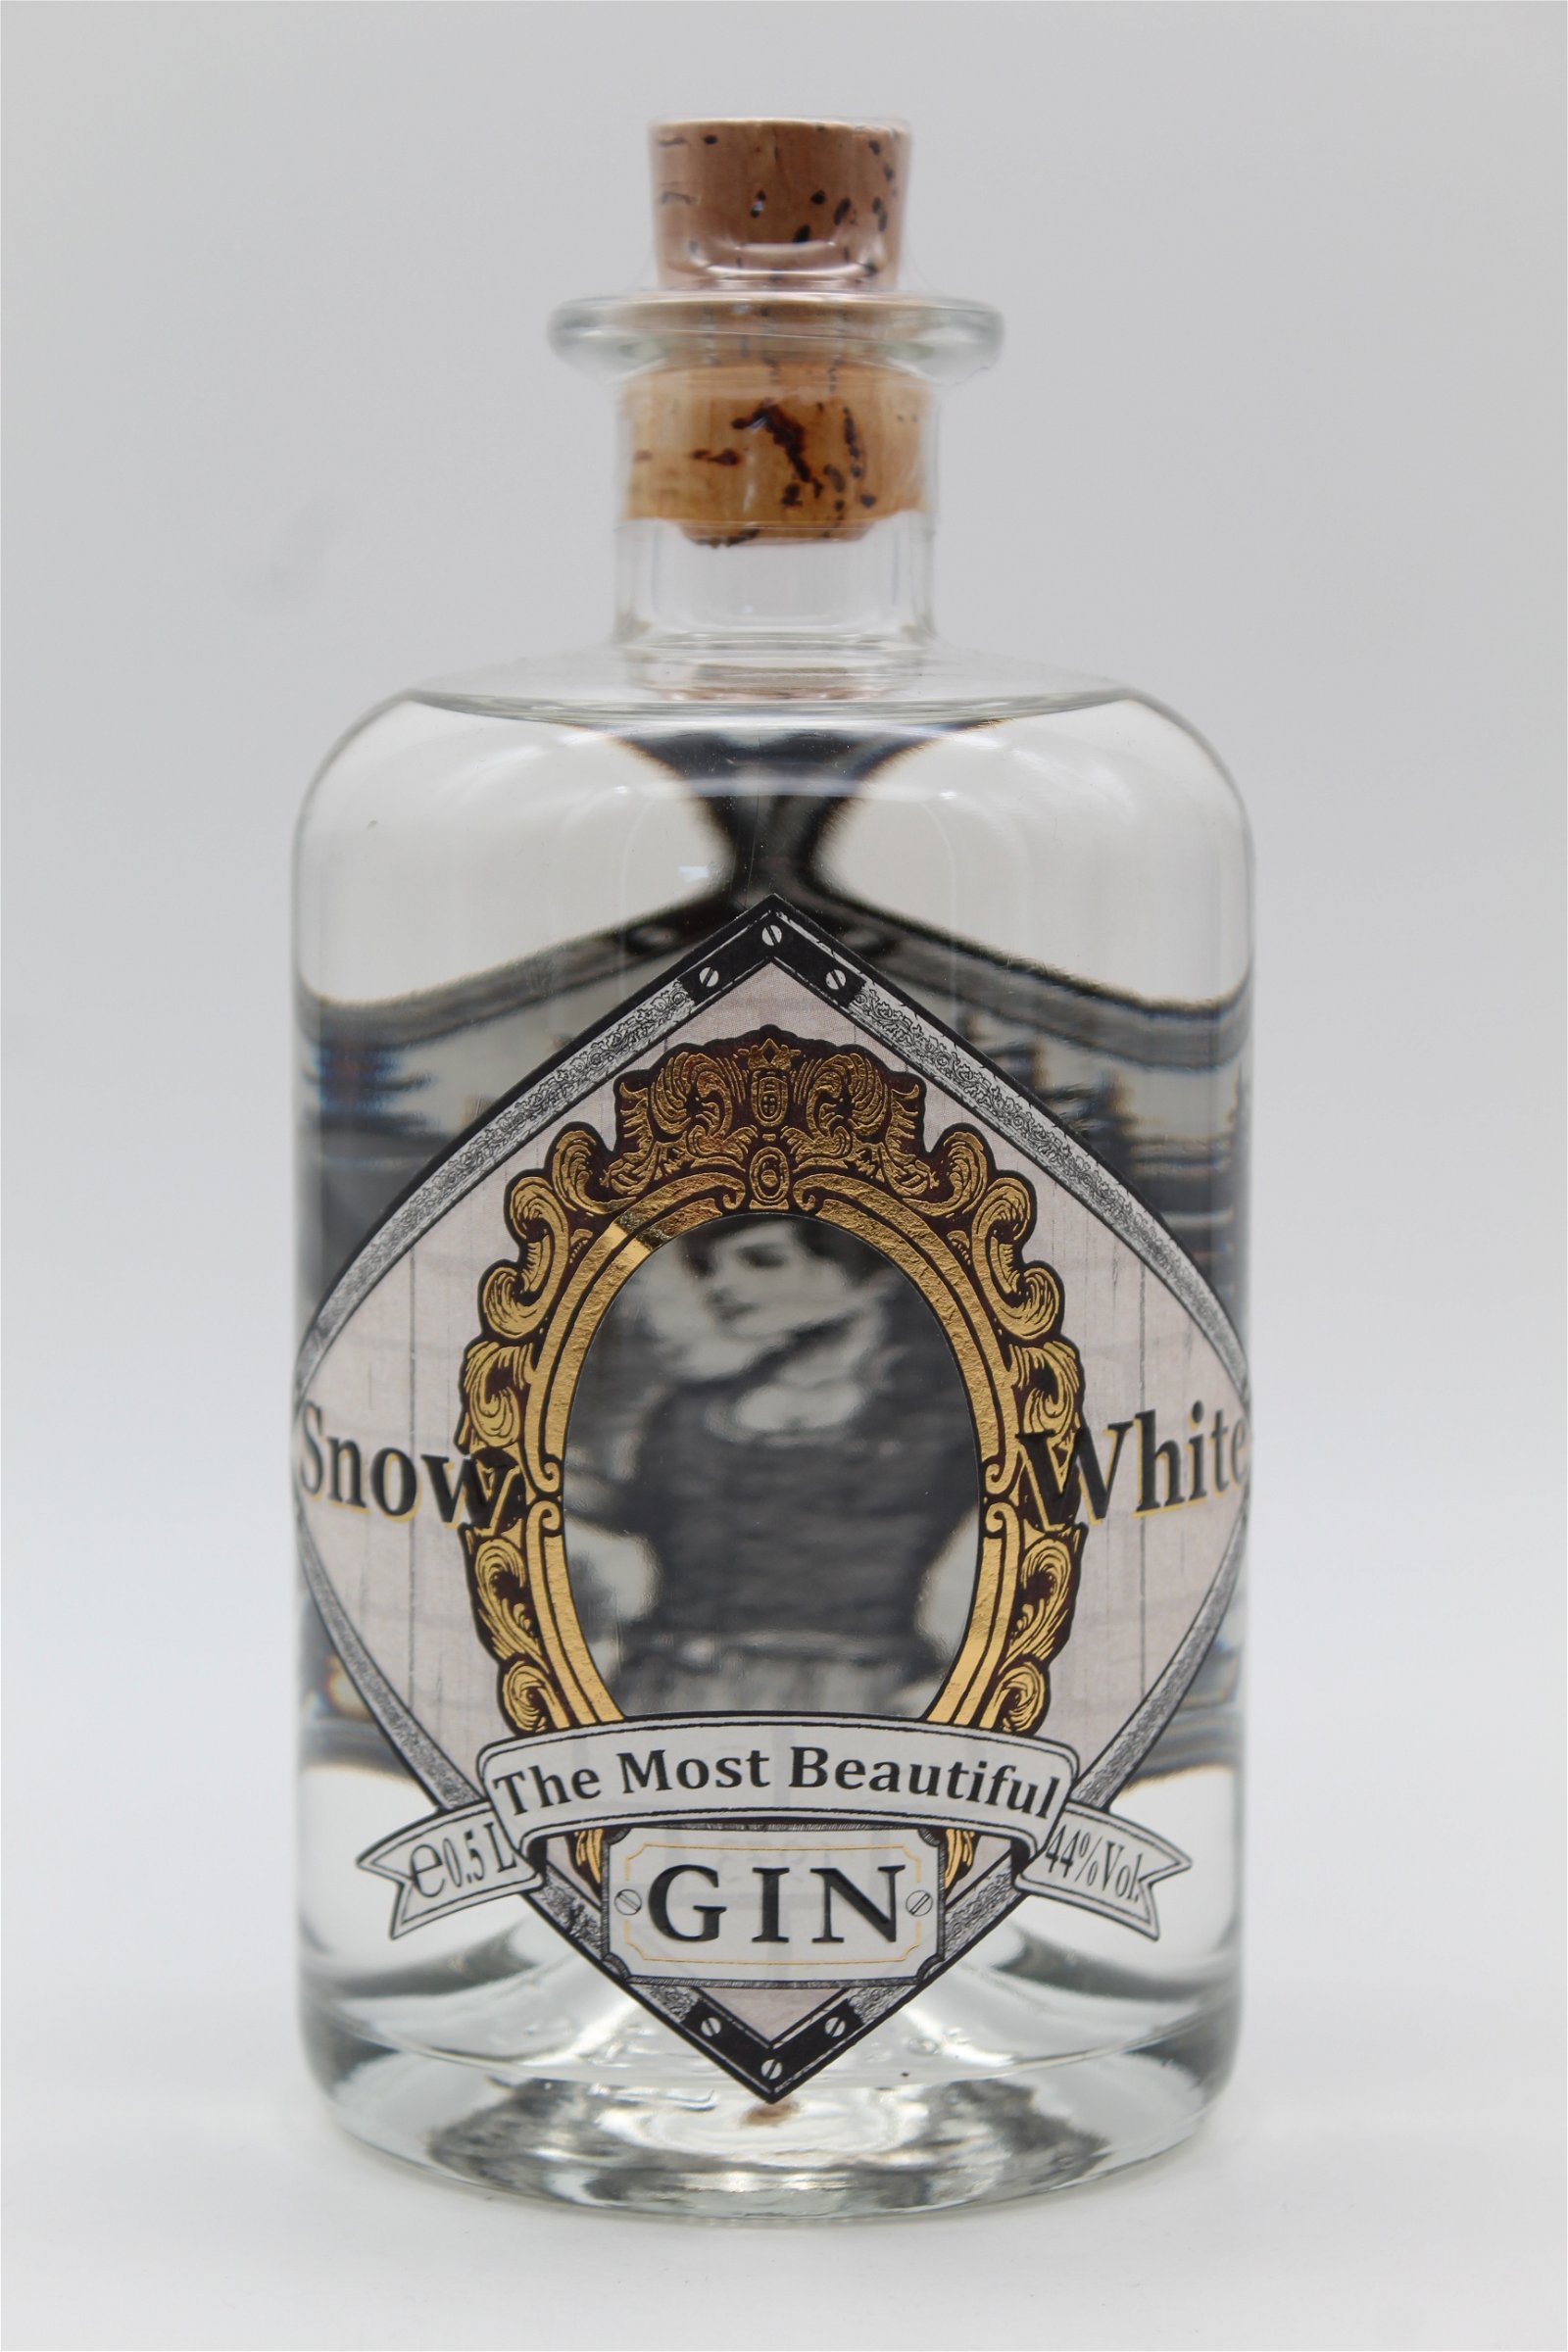 Snow White Gin The Most Beautiful Gin